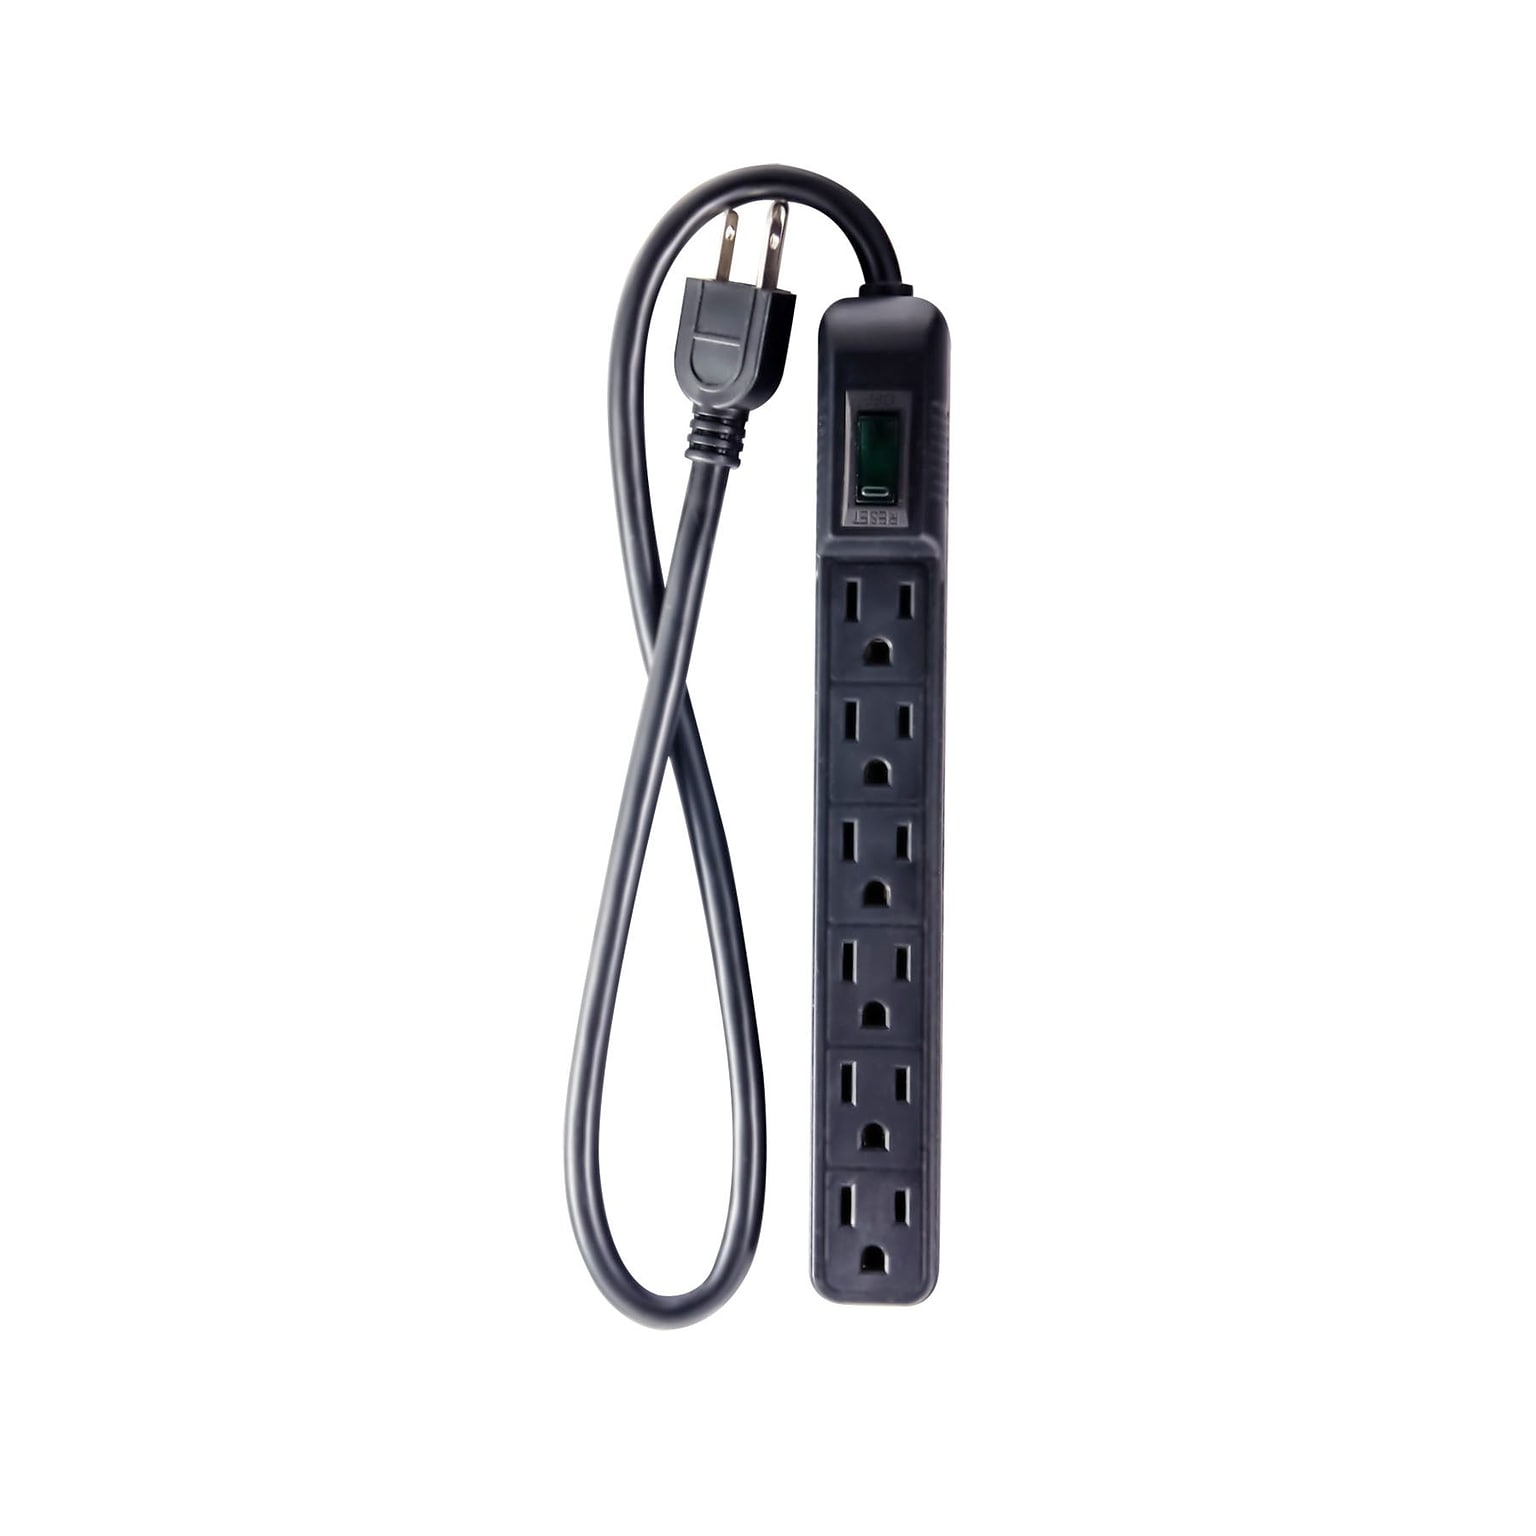 Power by GoGreen 6 Outlet Mini Surge Protector, 2 cord, Black, GG-16103MINBK